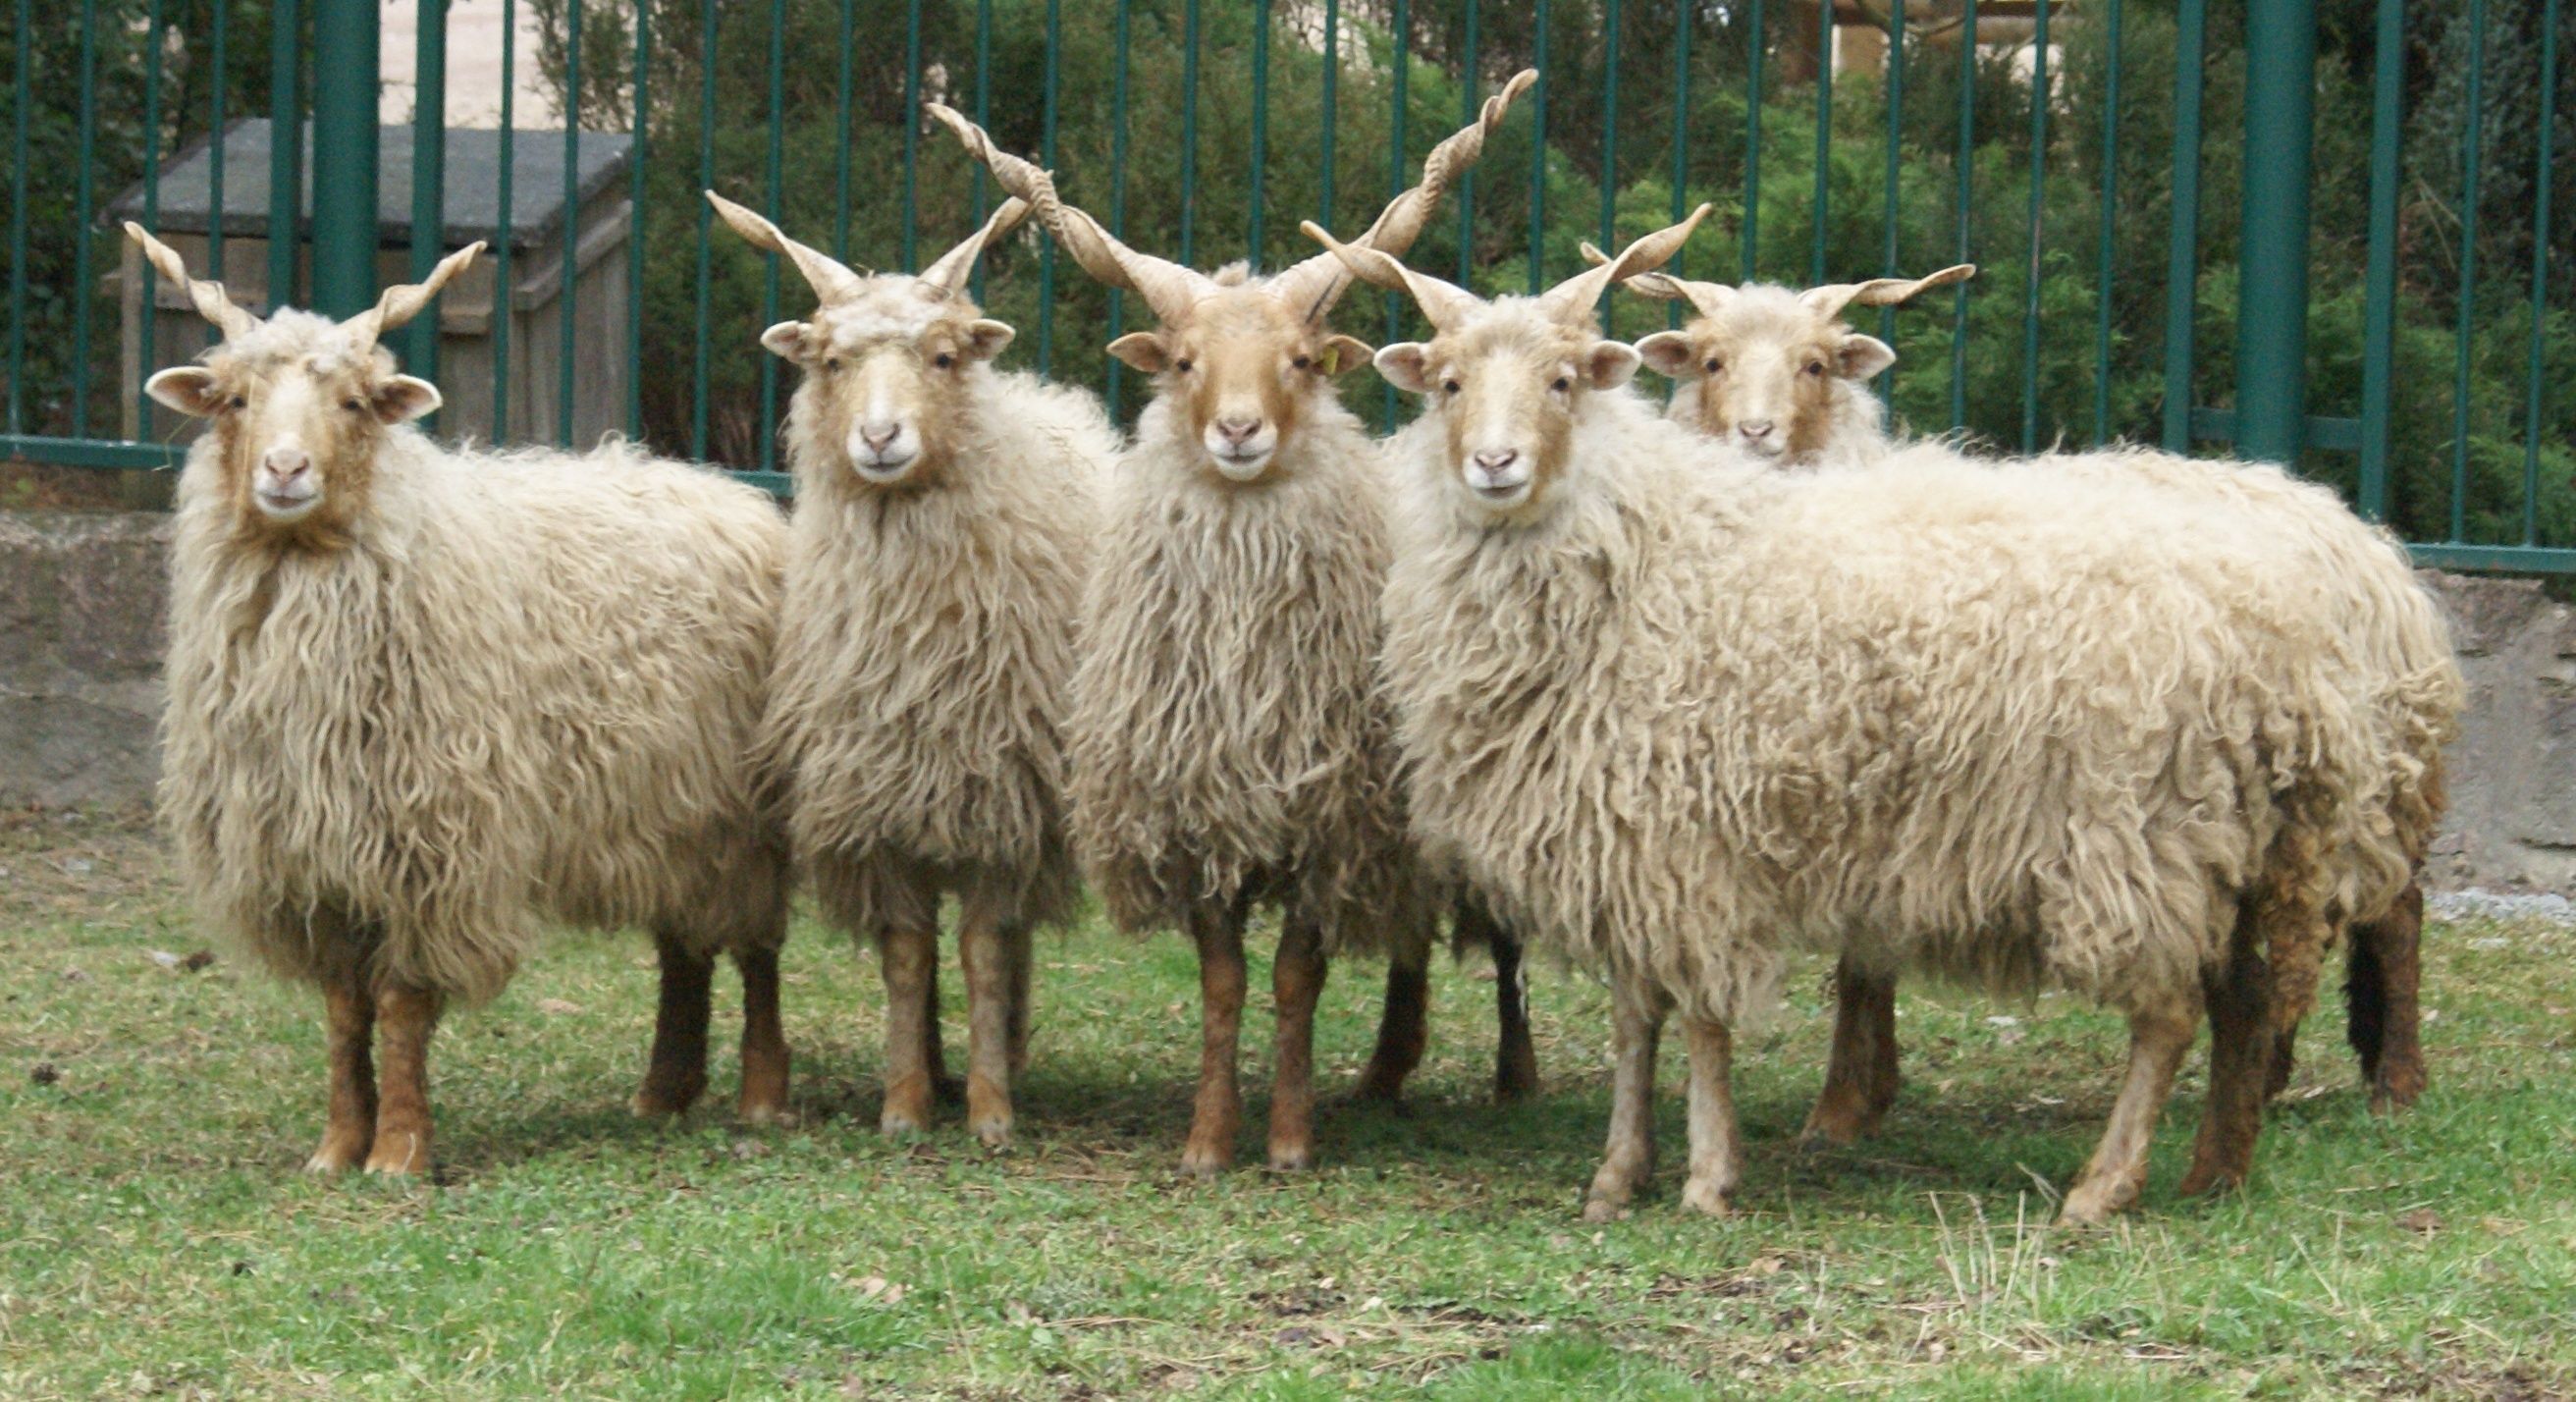 The Racka is a breed of sheep known for its unusual spiral-shaped ...